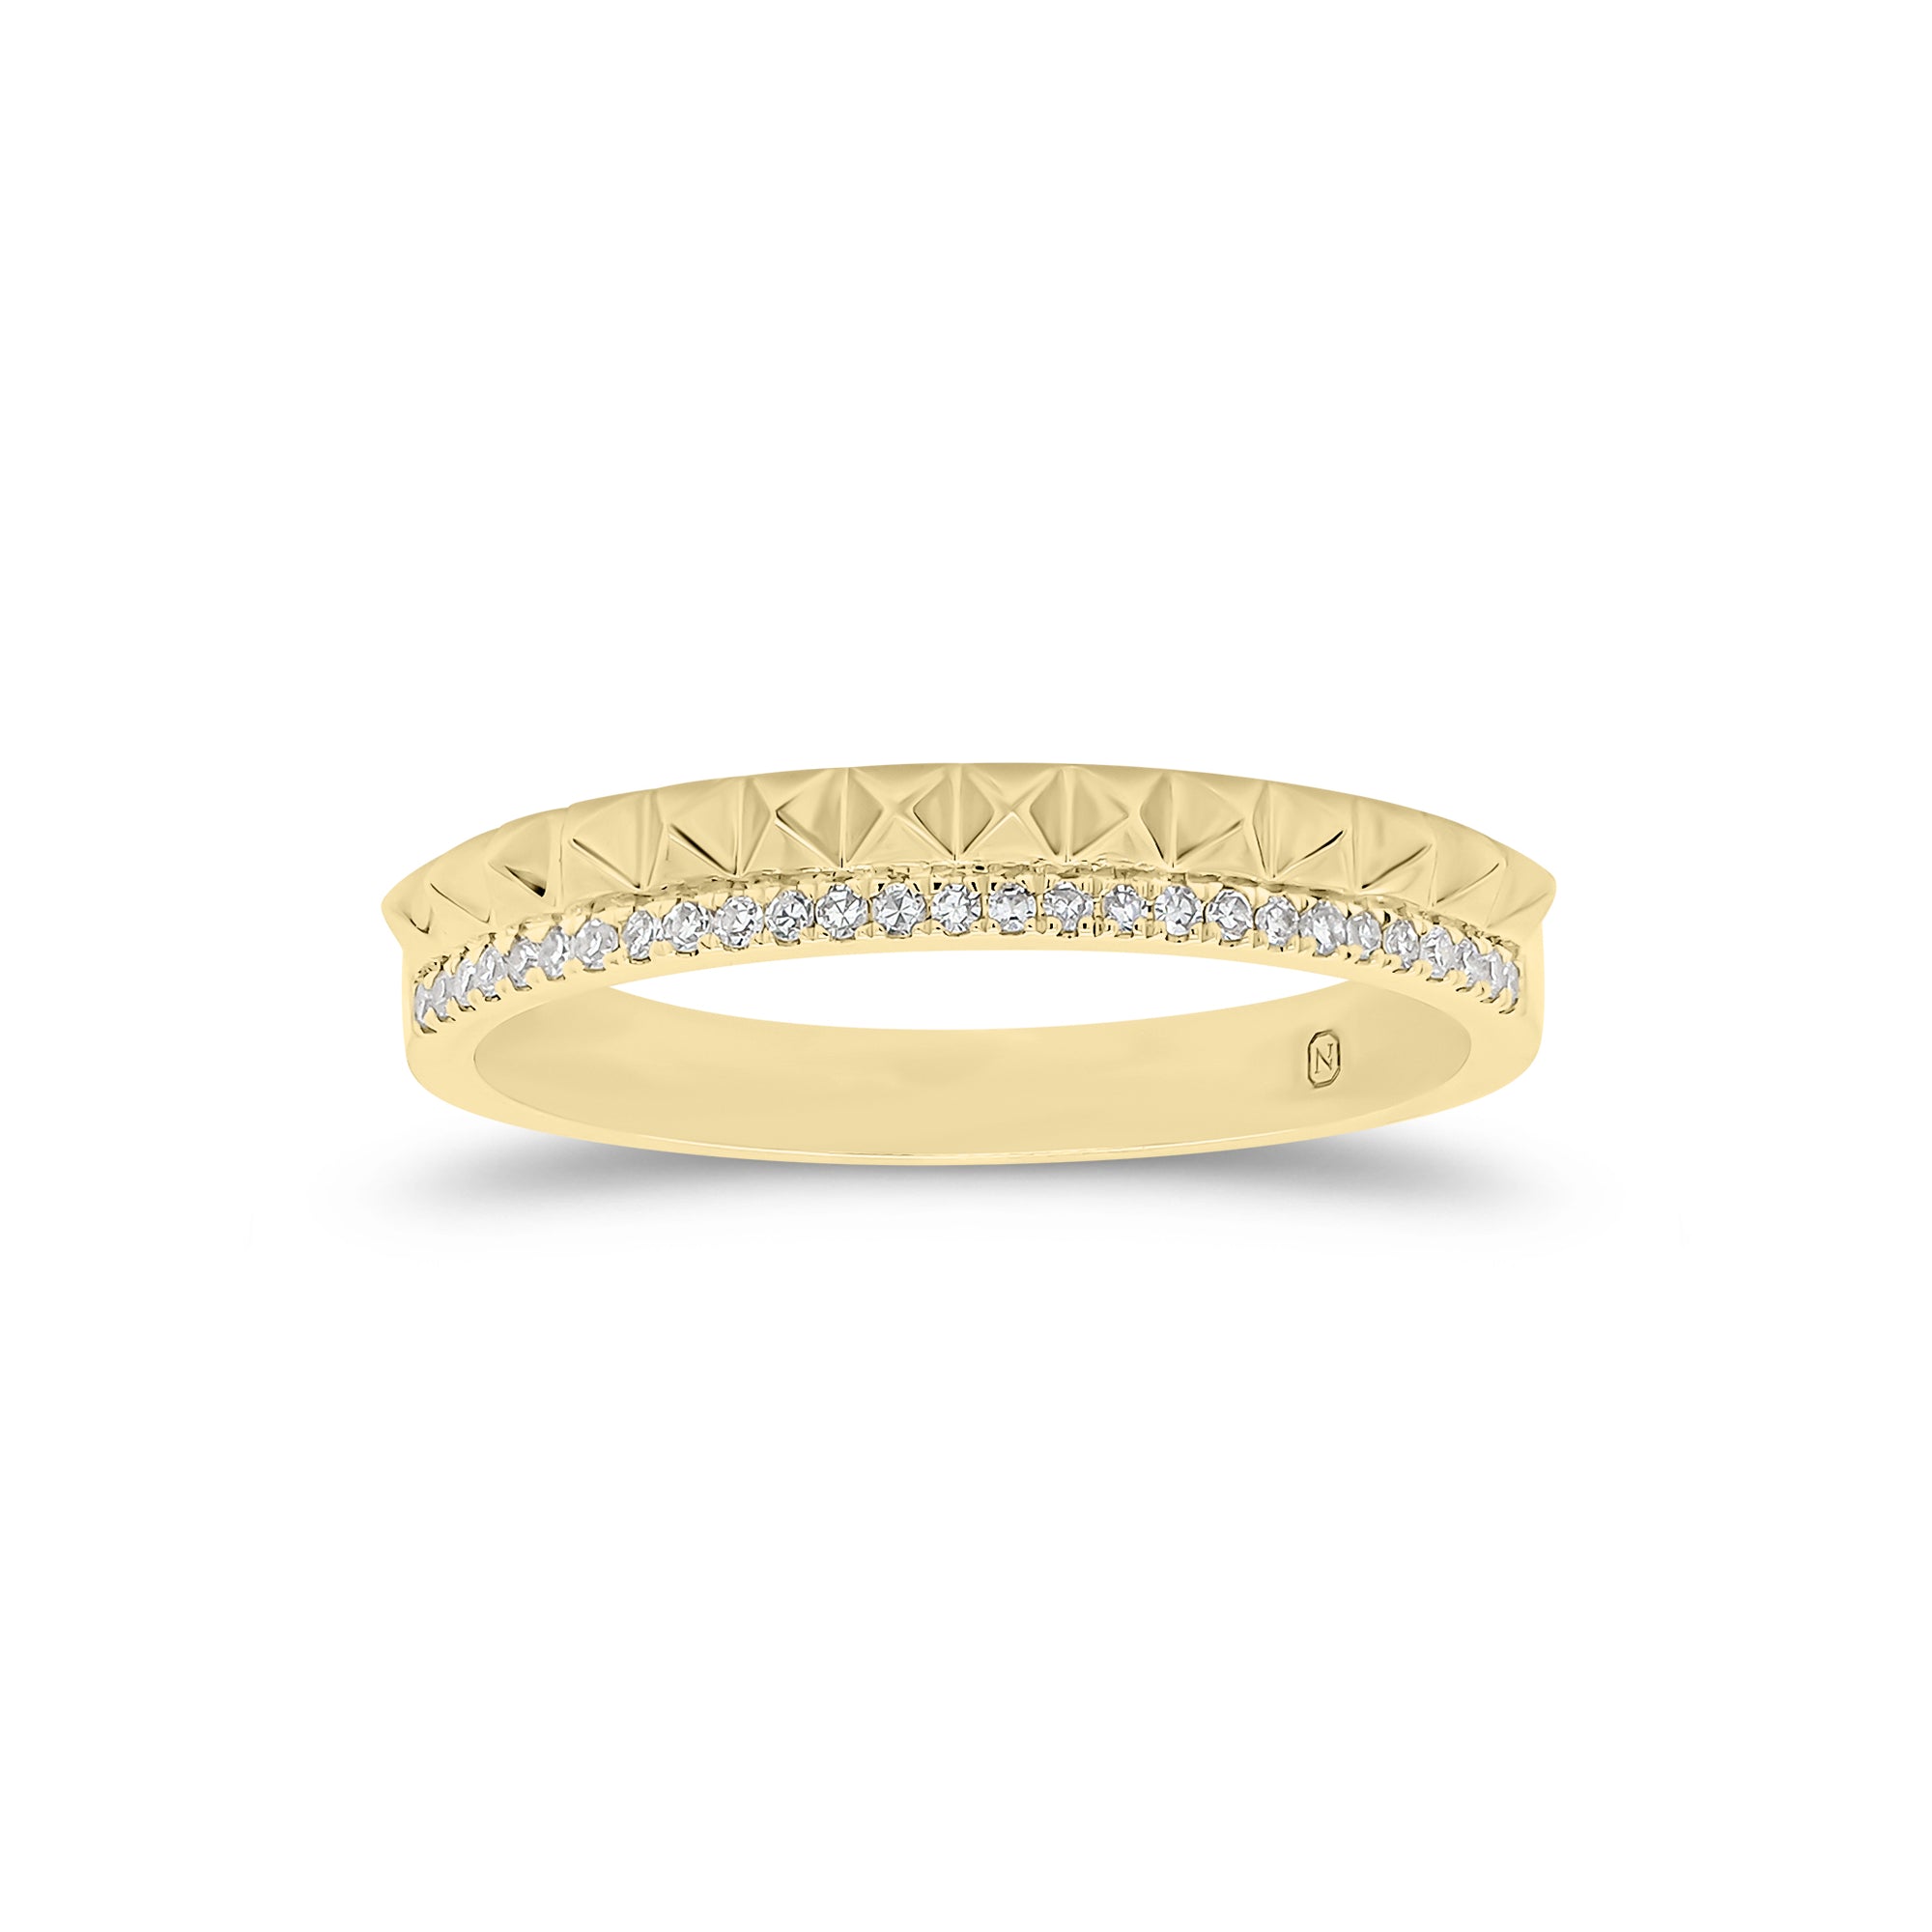 Diamond and Gold Pyramid Double Ring - 14K gold weighing 2.36 grams  - 29 round diamonds weighing 0.09 caratsDiamond & Gold Pyramid Double Ring  - 14K gold weighing 2.36 grams  - 29 round diamonds weighing 0.09 carats